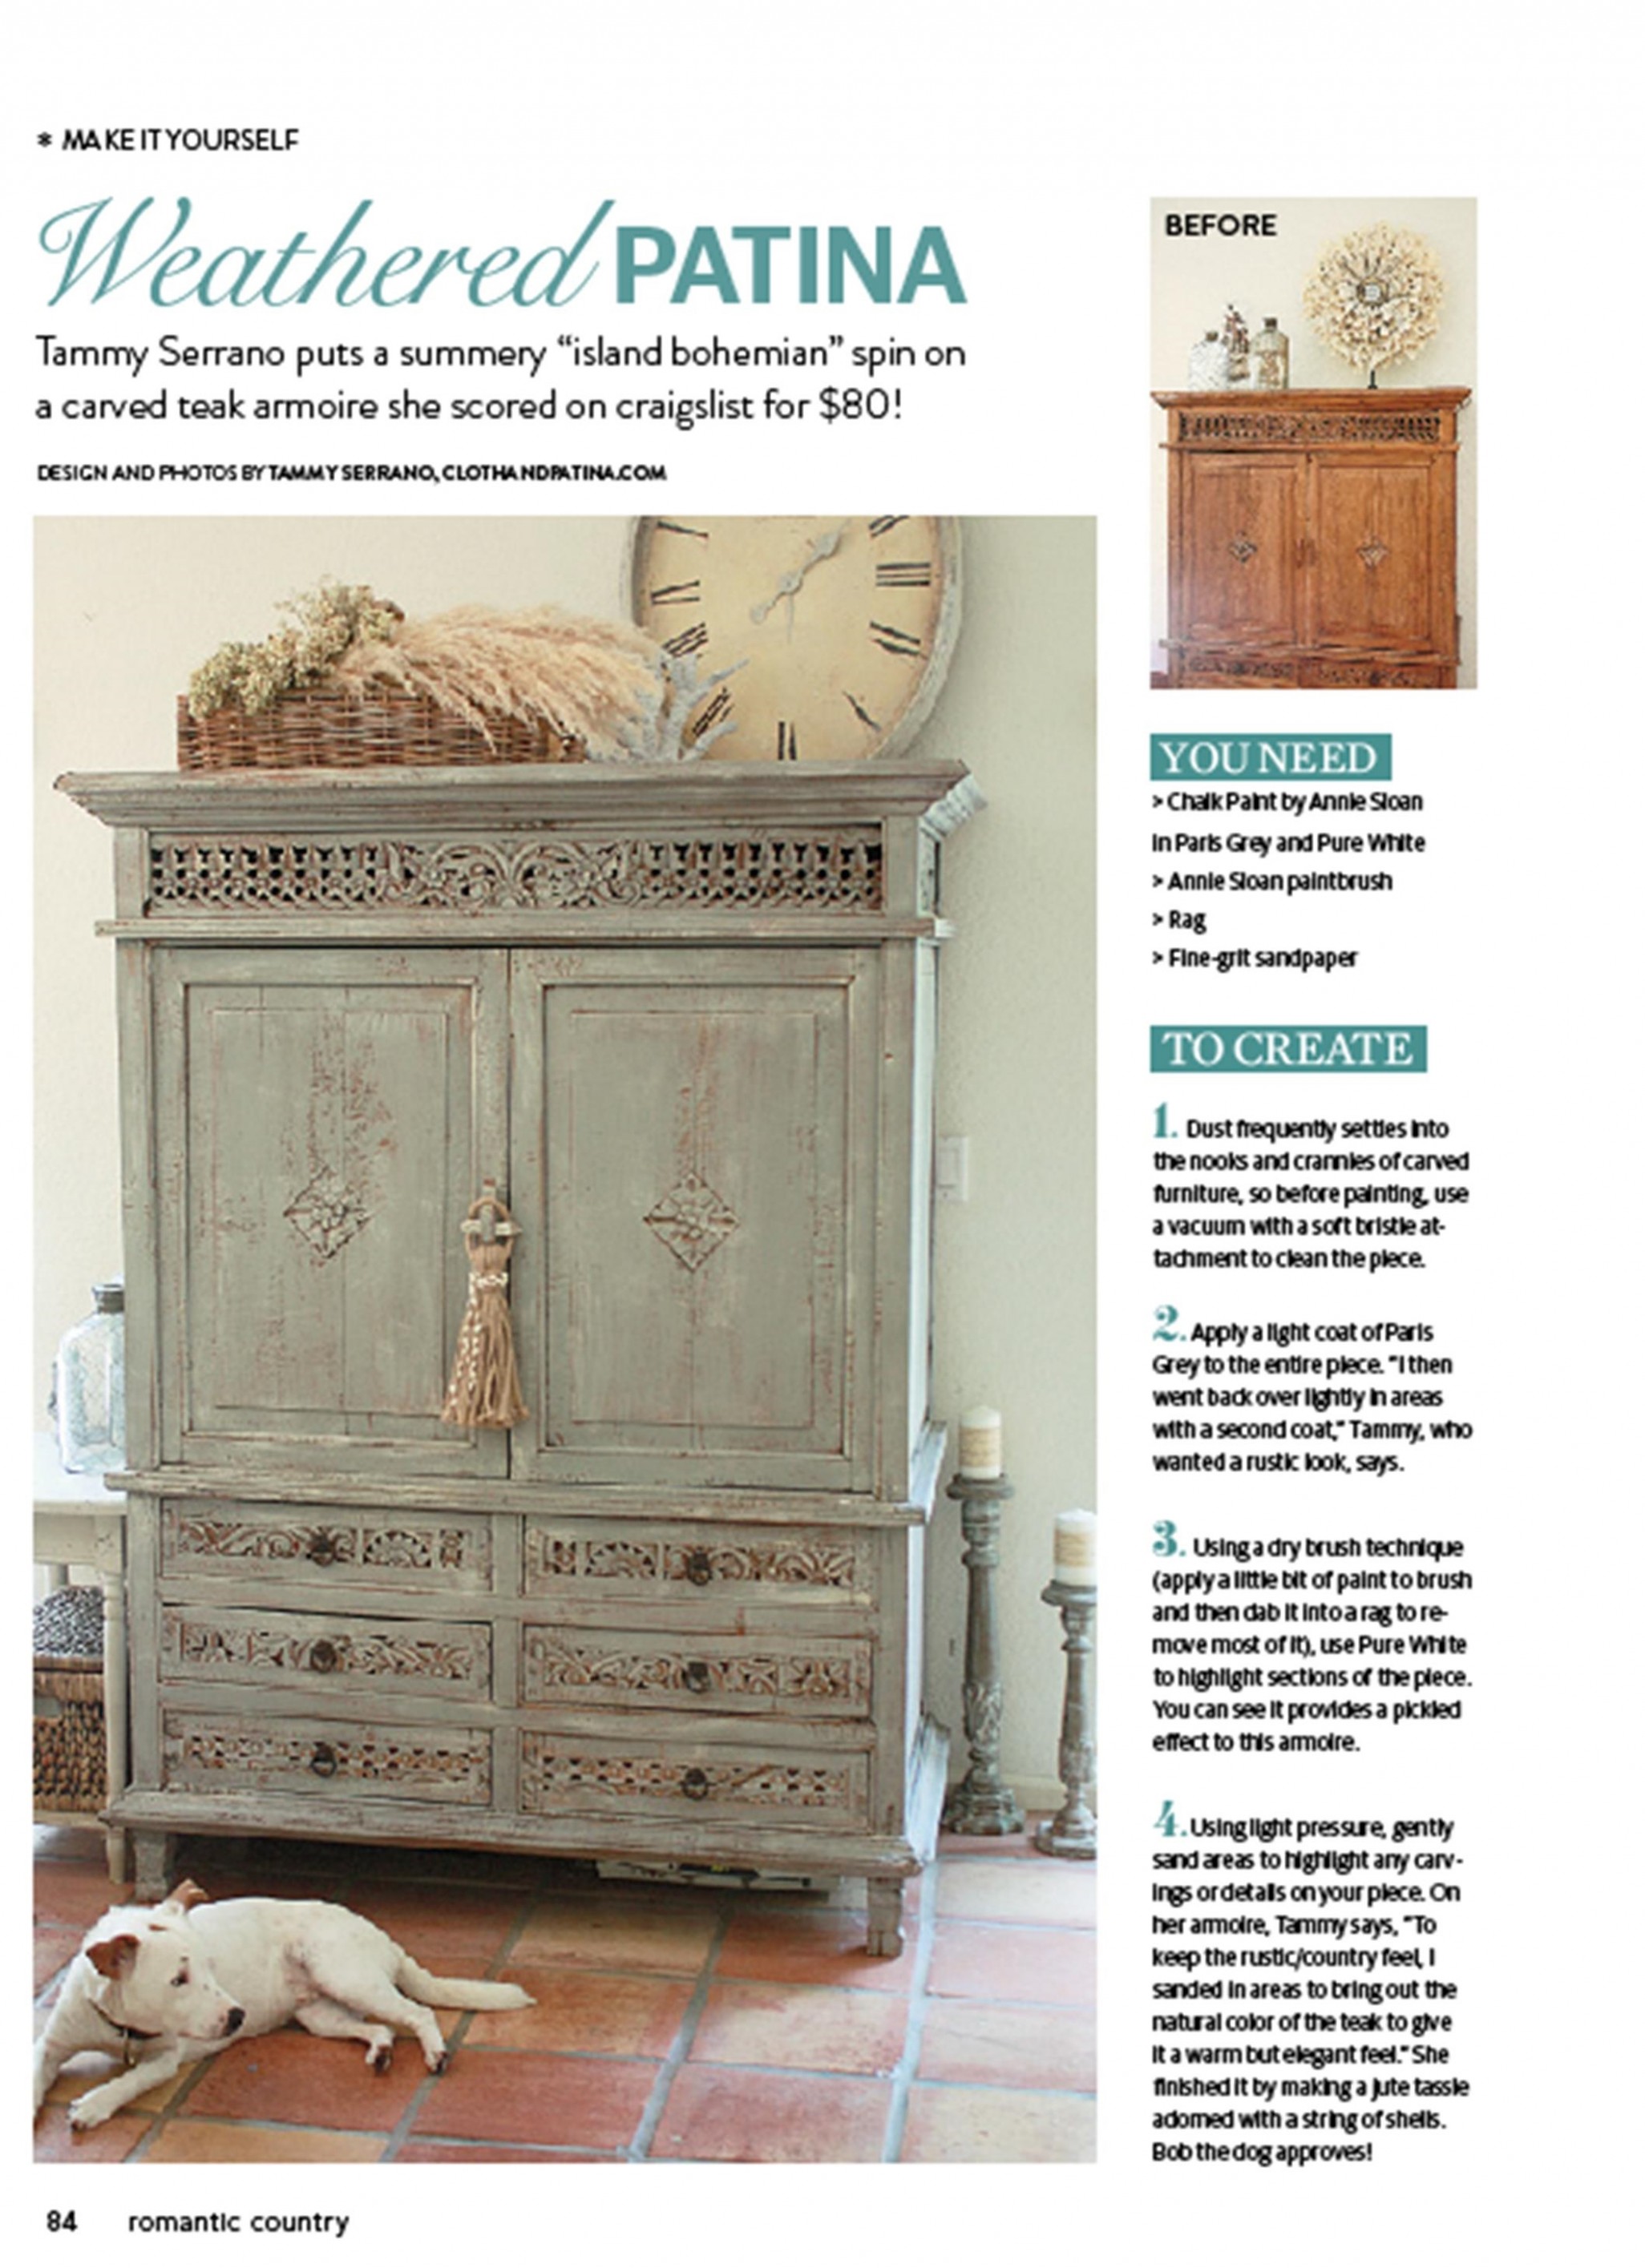 Decorative Paint By Annie Sloan | Cloth And Patina Where To Buy Annie Sloan Chalk Paint In Nashville